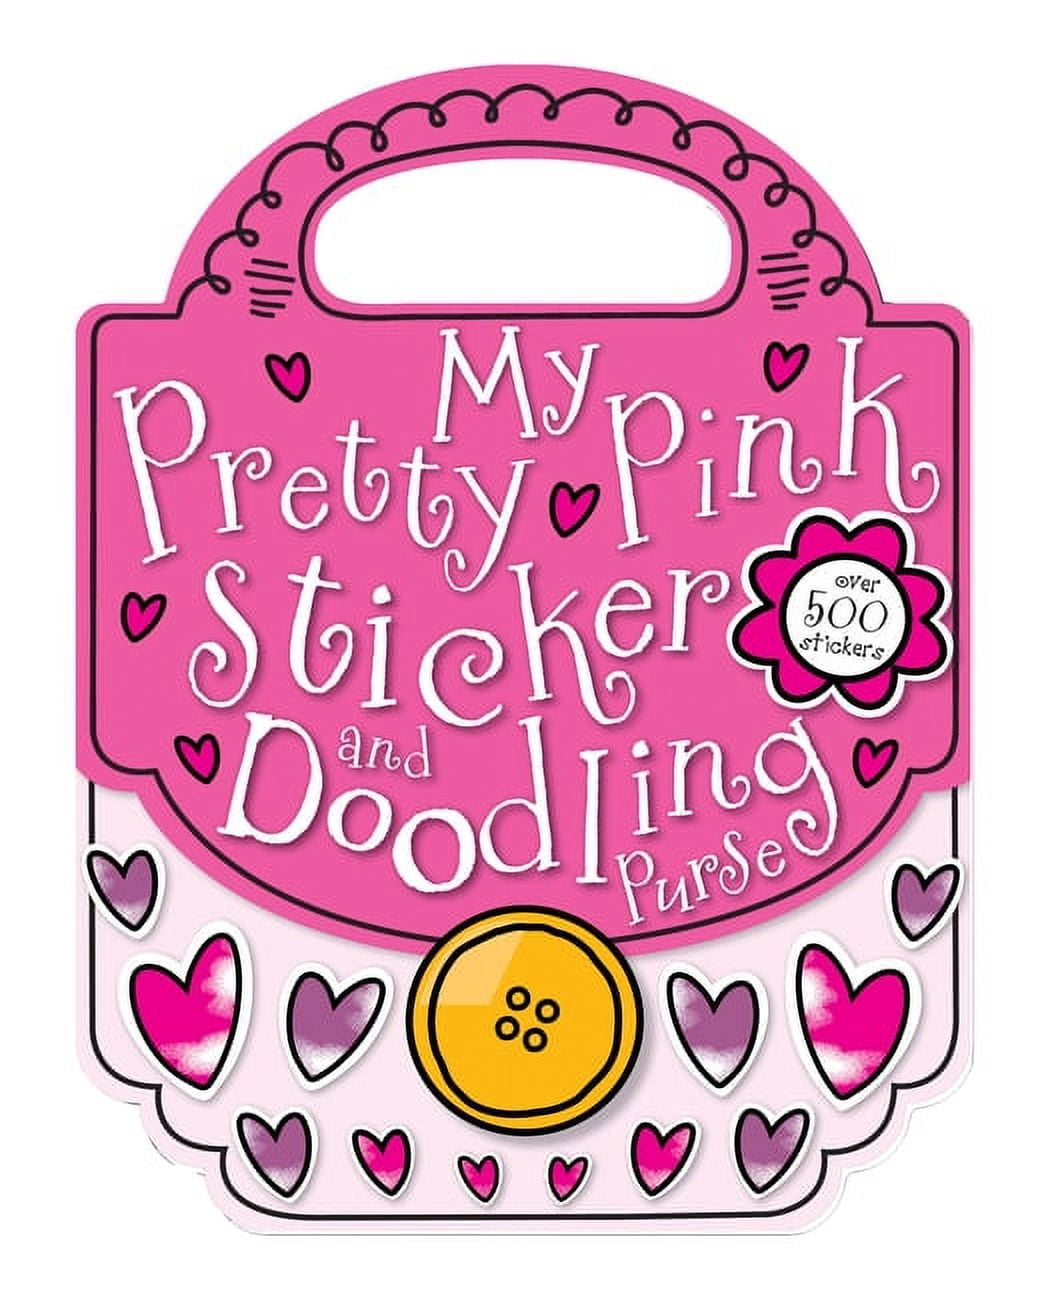 Hands Off My Stickers Book – 2 Pink Magnolias